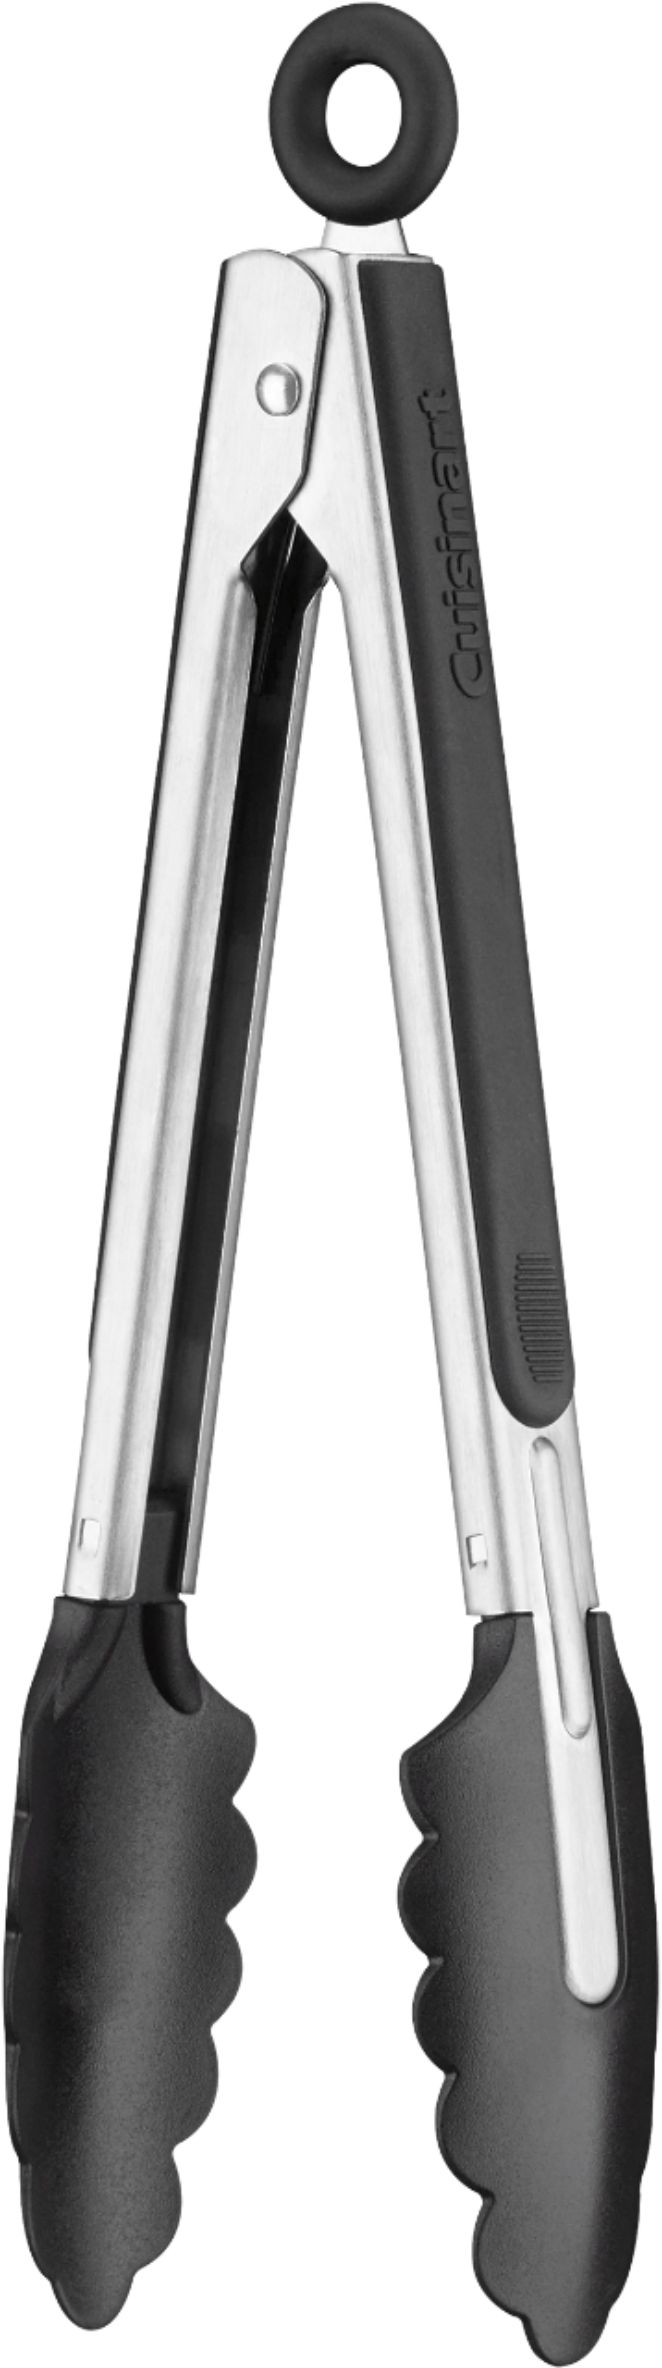 Cuisinart Curve Handle Collections Peeler